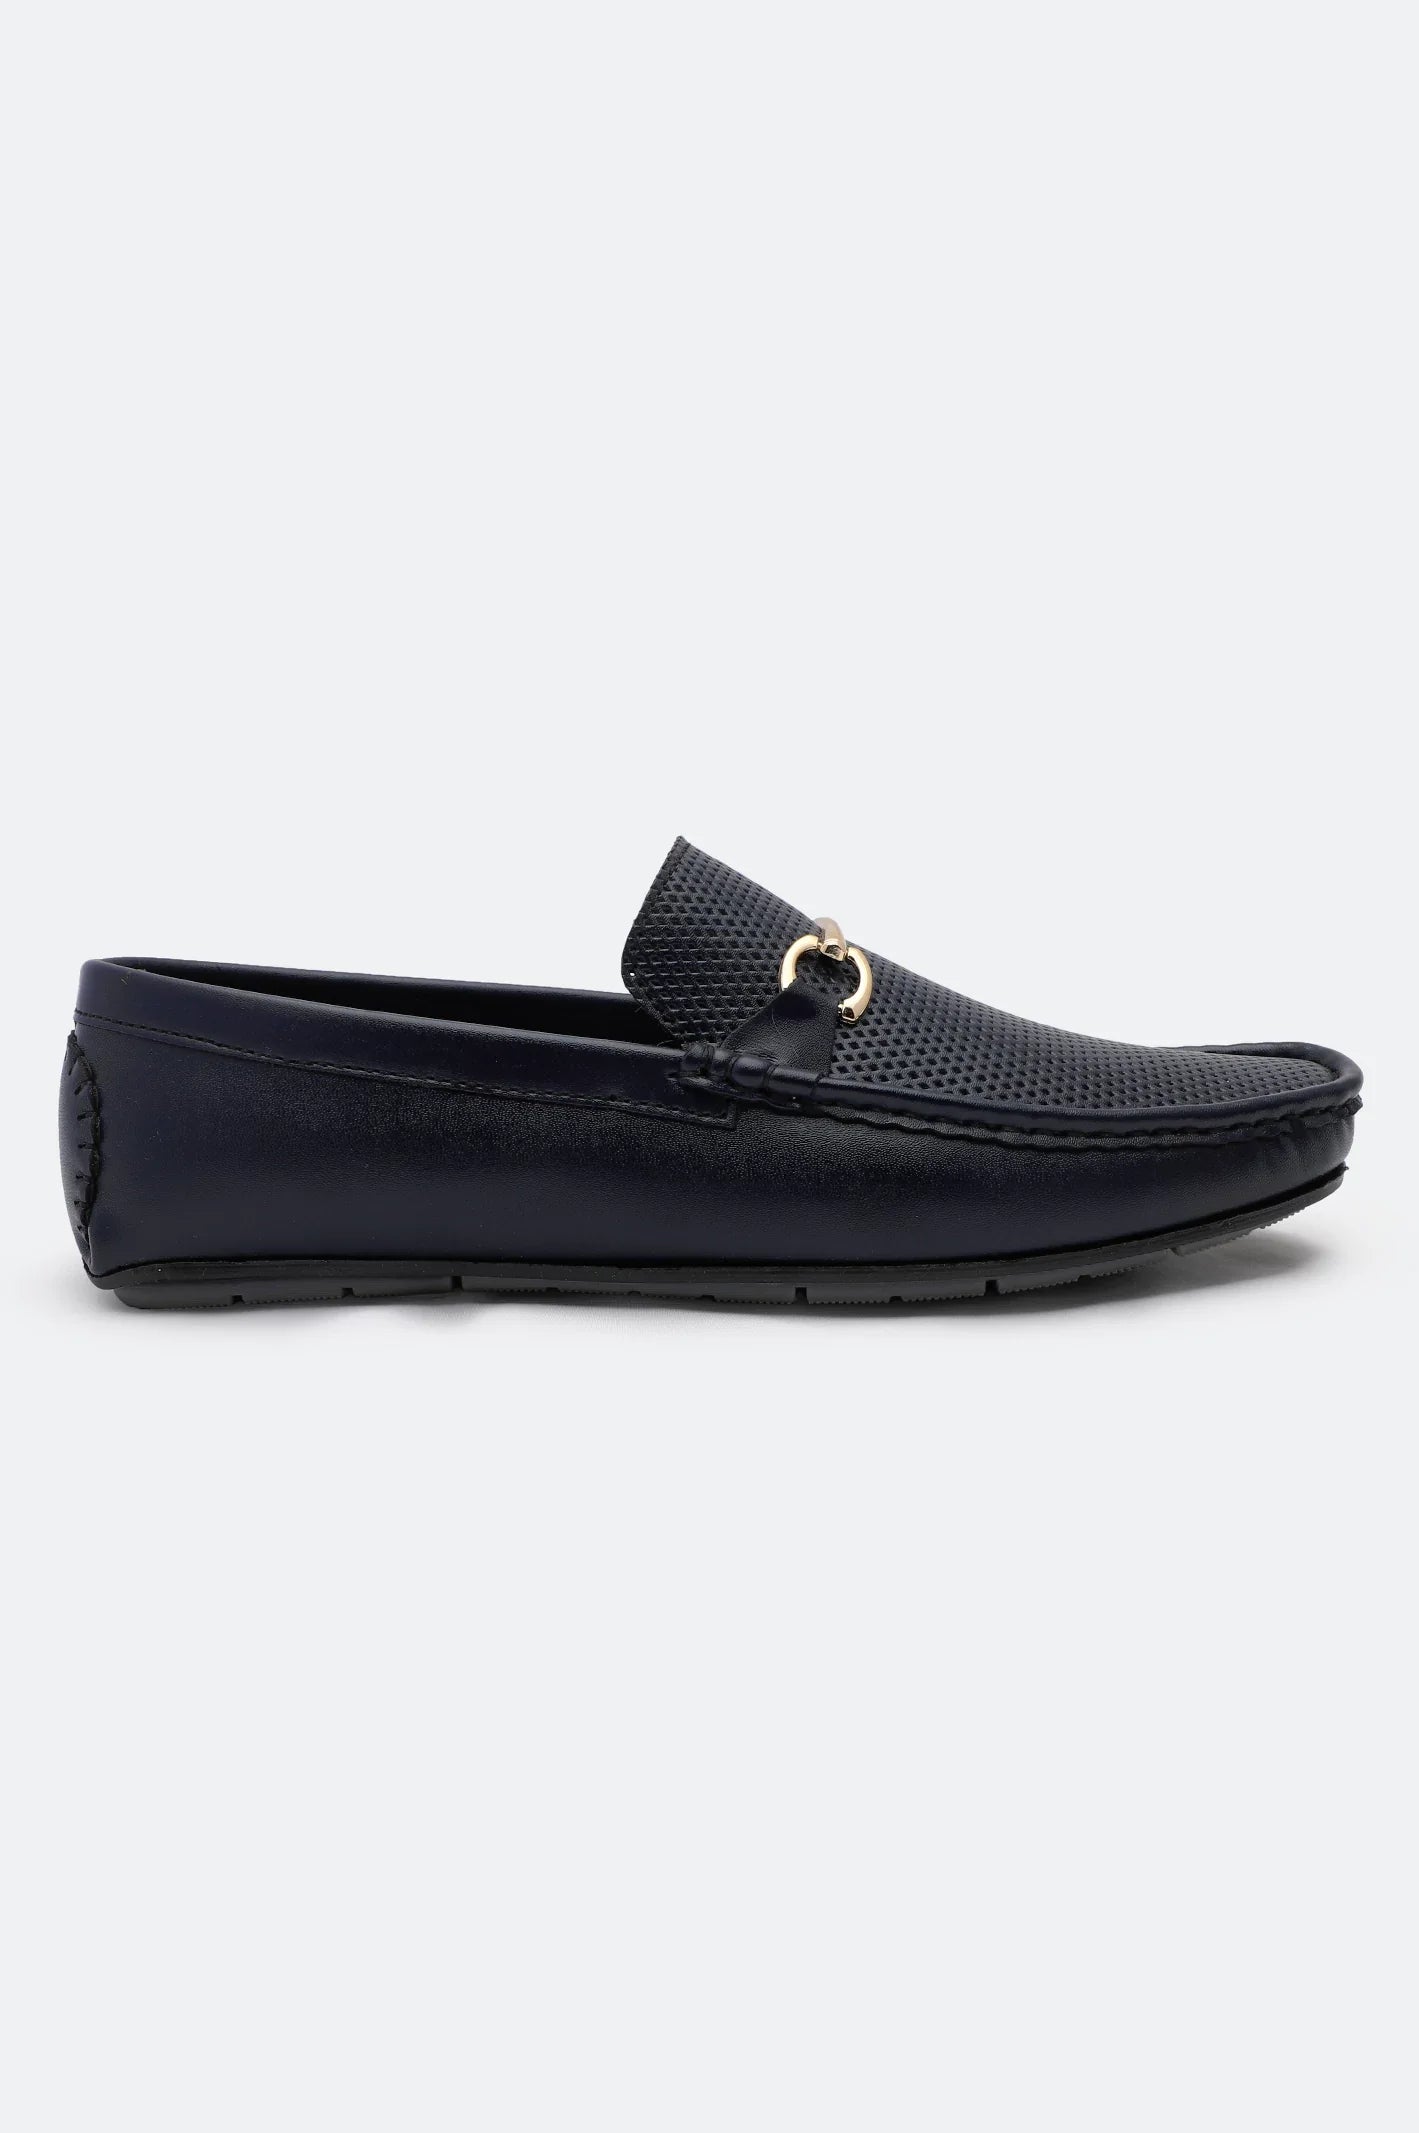 Navy Blue Casual Moccasins Shoes